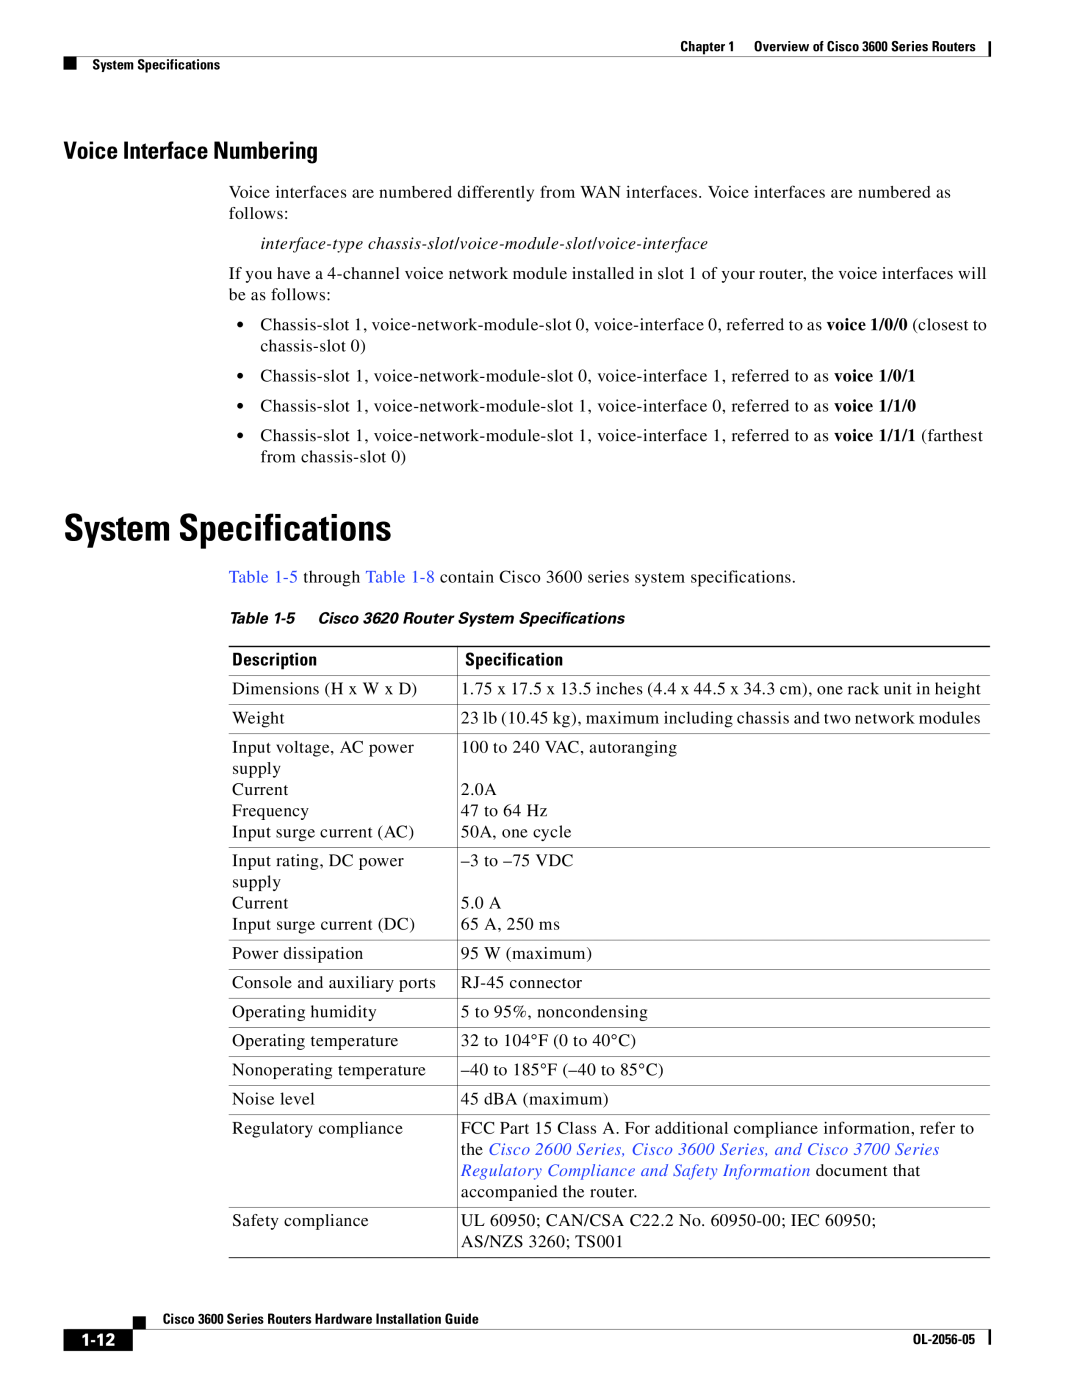 Cisco Systems System Specifications, the Cisco 2600 Series, Cisco 3600 Series, and Cisco 3700 Series, 1-12, Description 